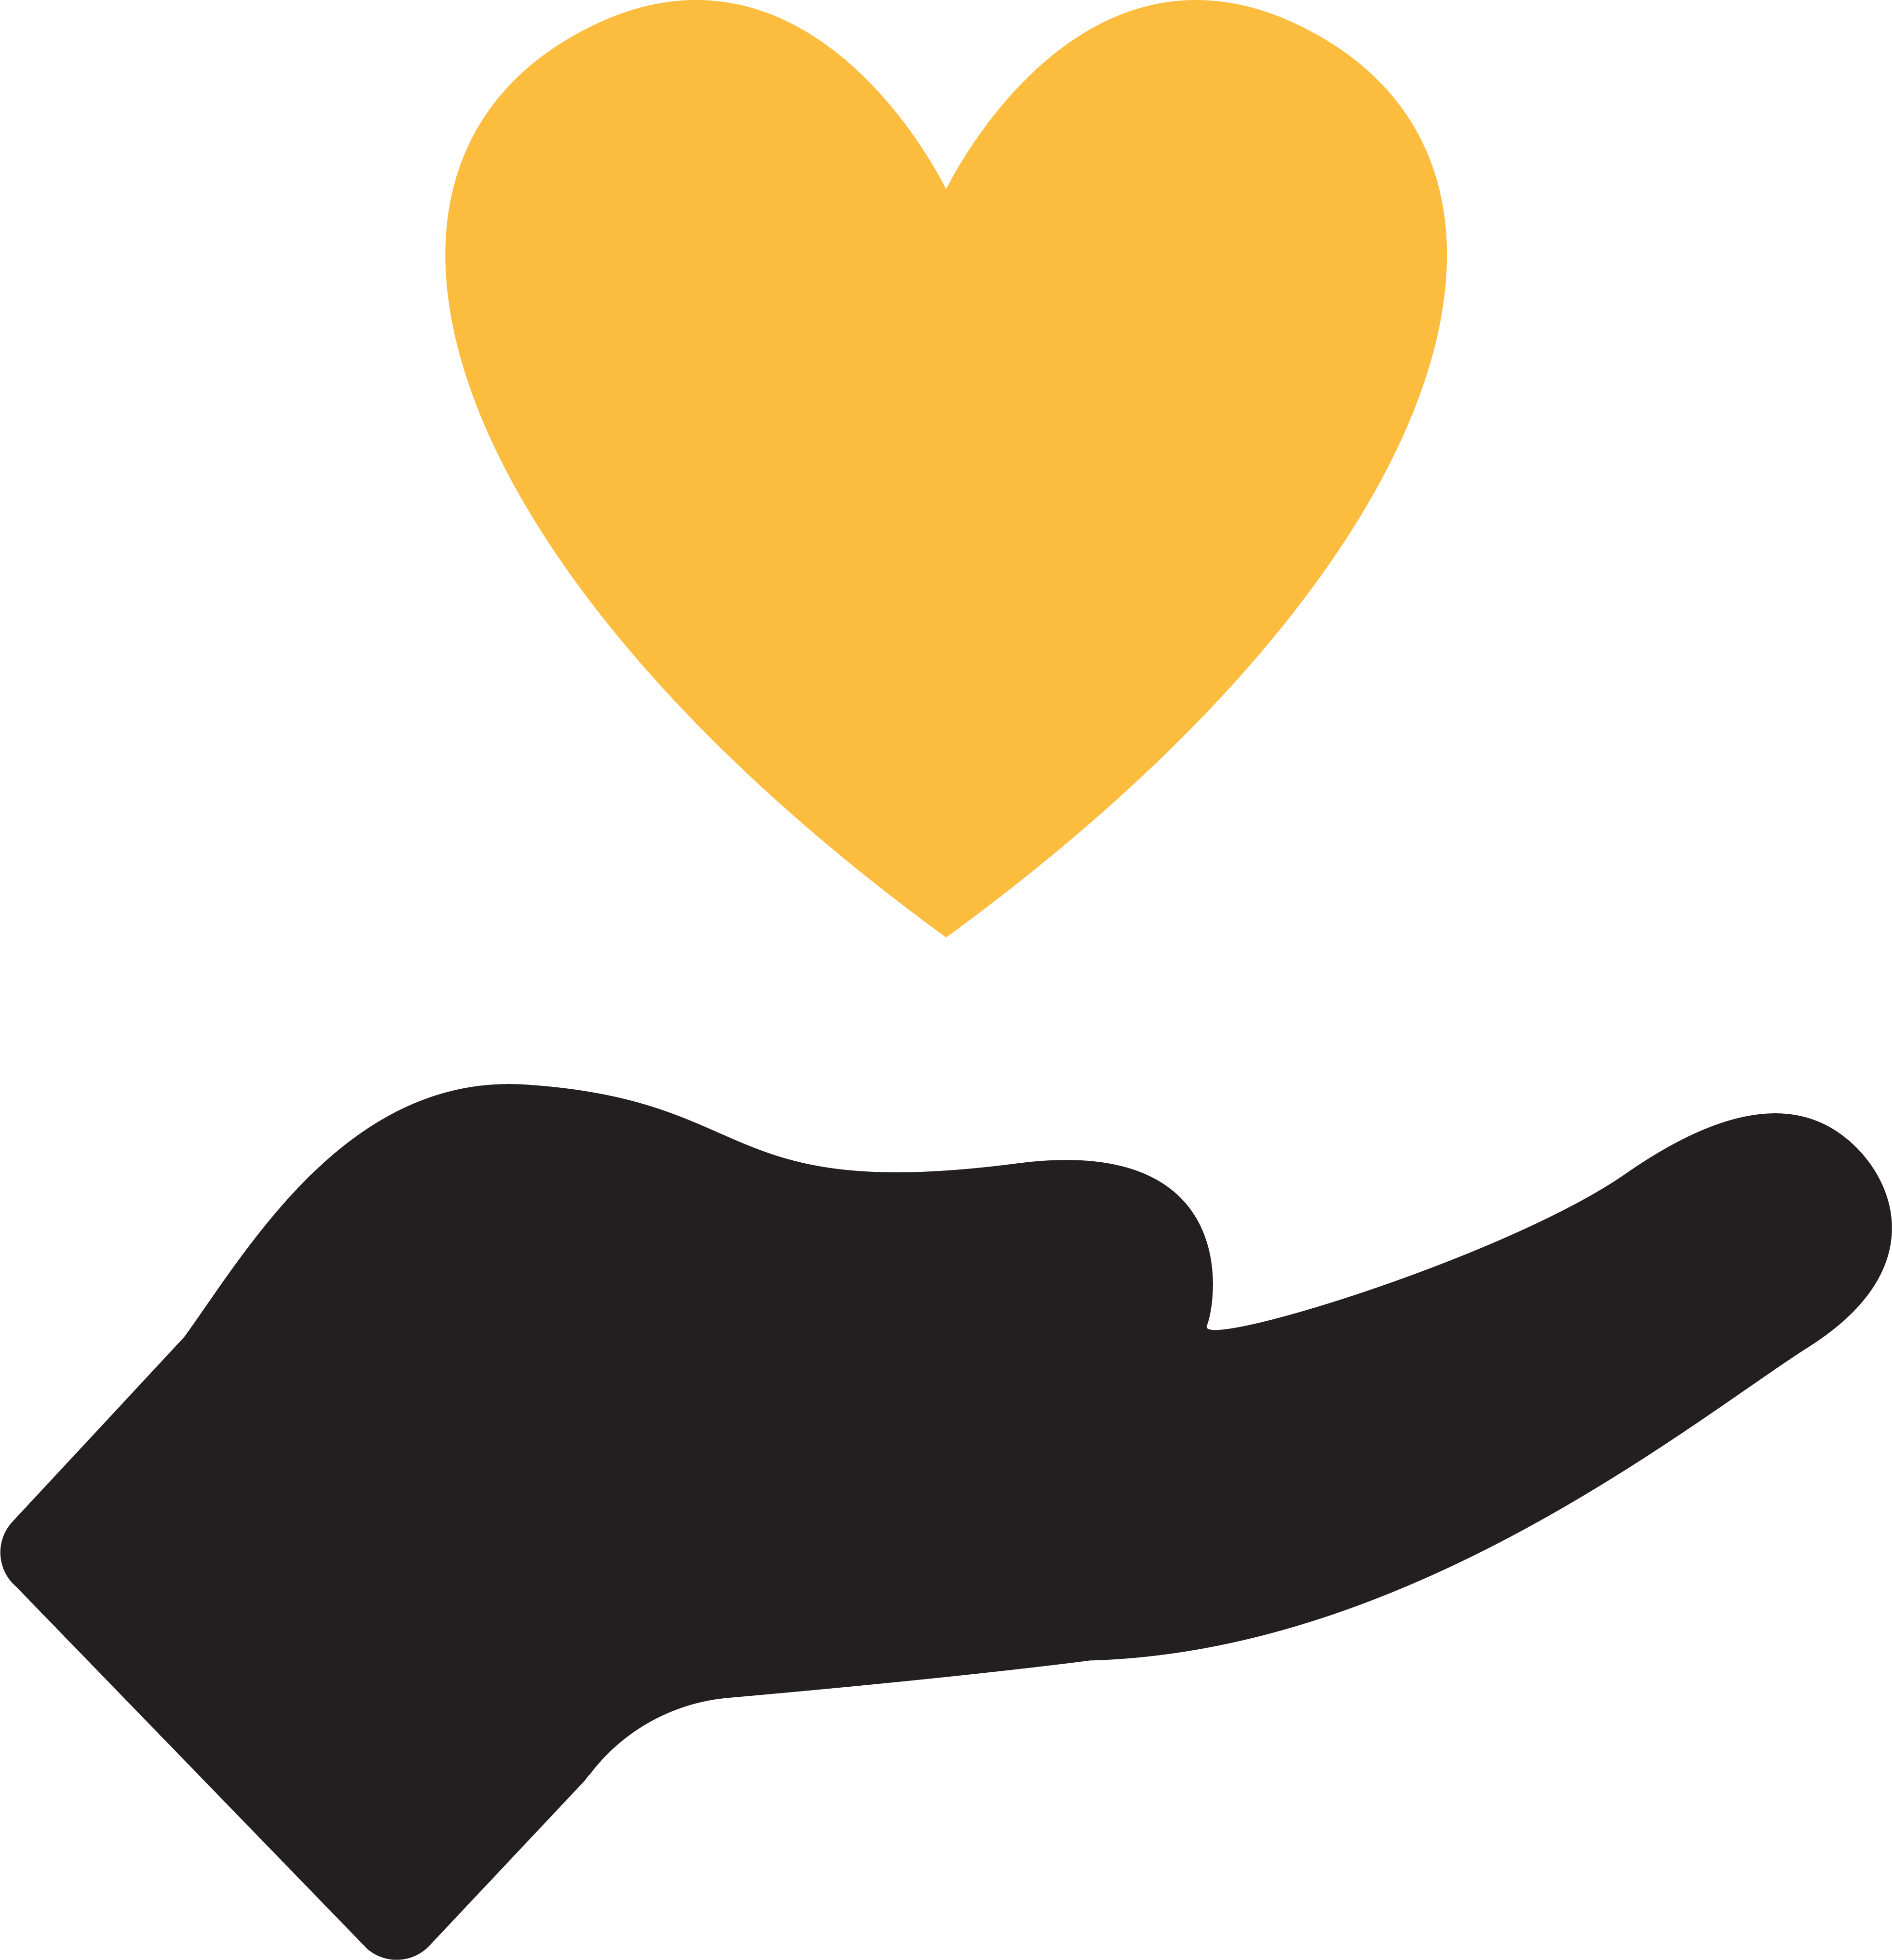 Hand holding a heart icon.